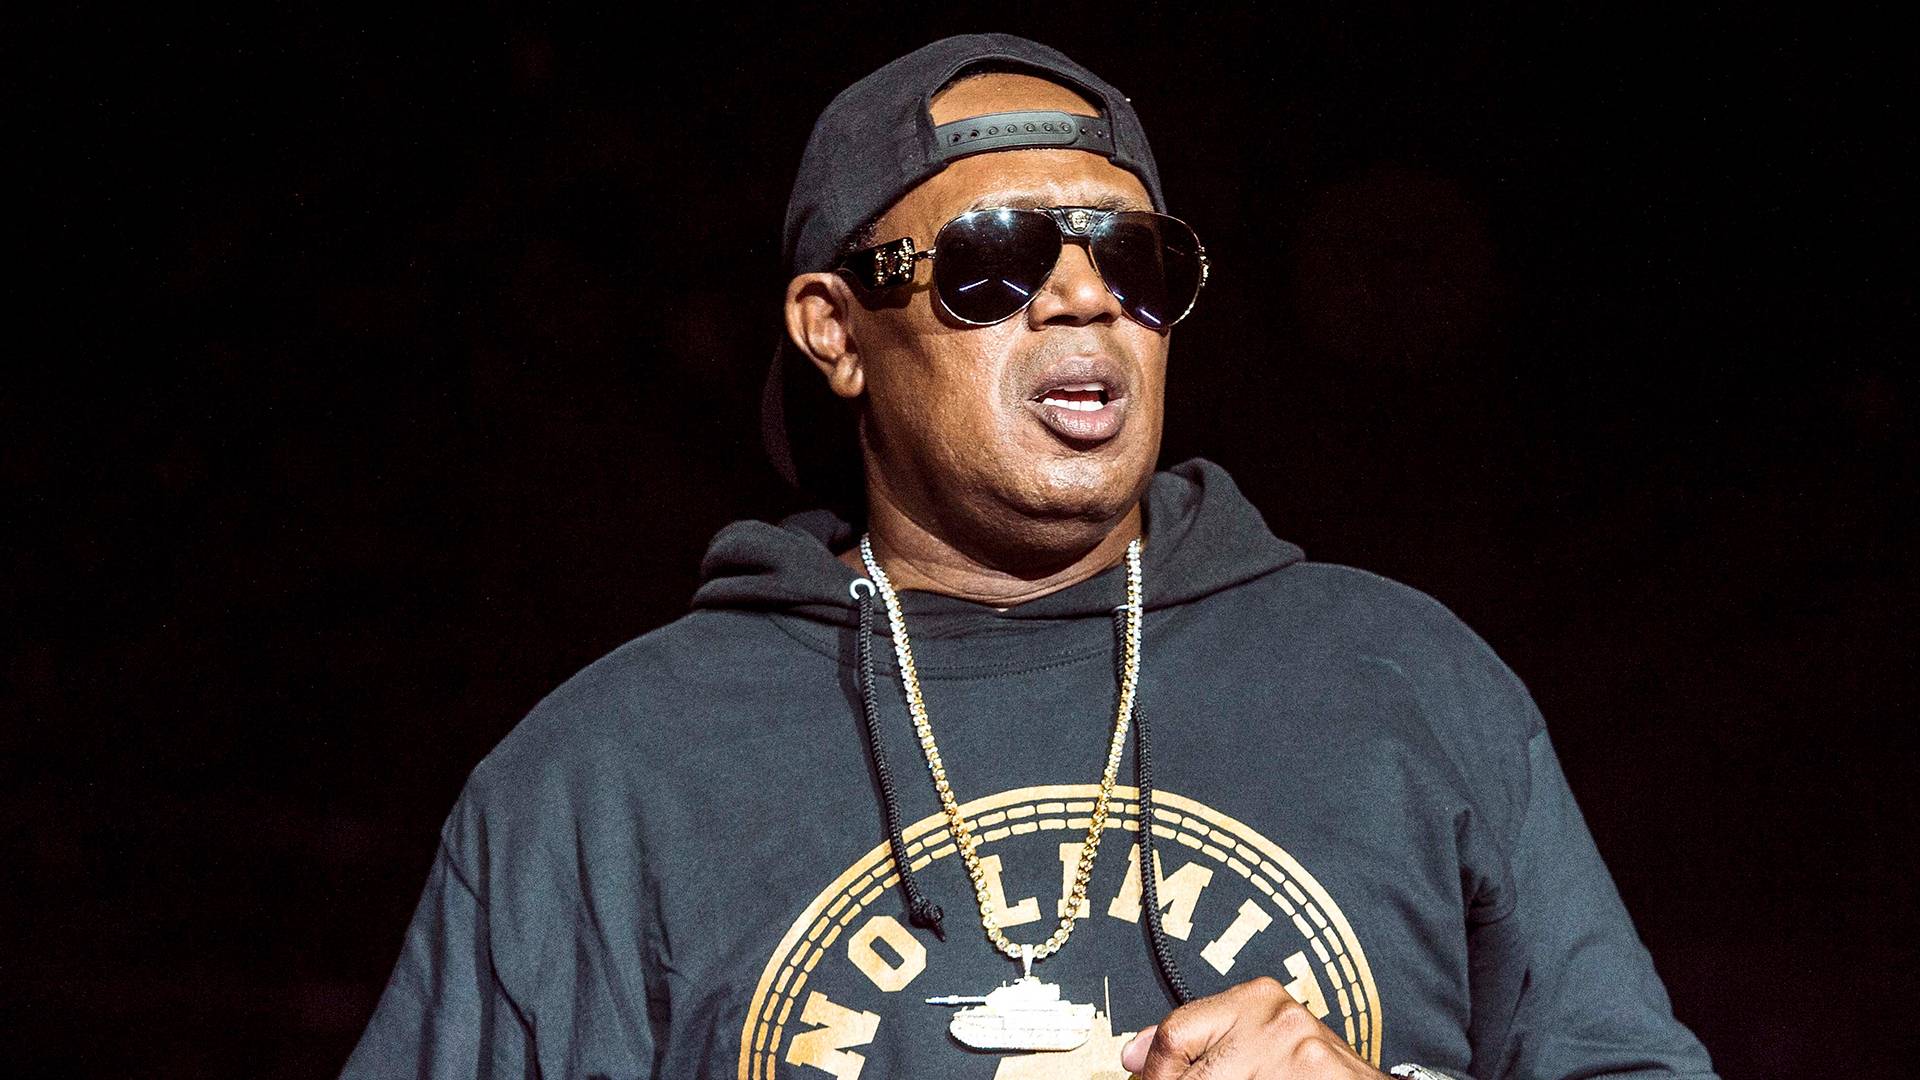 Master P on BET's News Shows for 'No Limit Chronicles'.